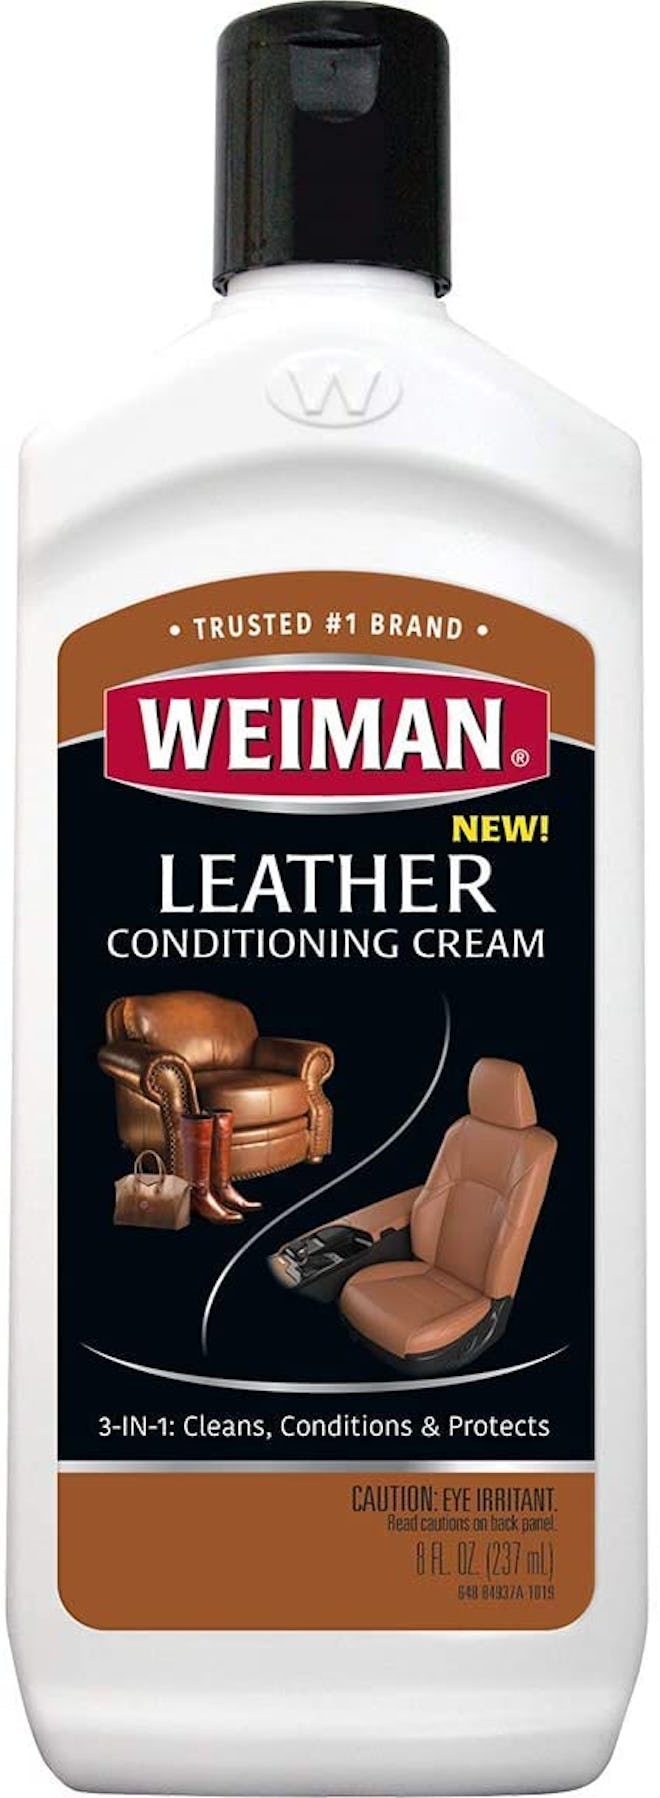 Weiman 3-in-1 Leather Cleaner